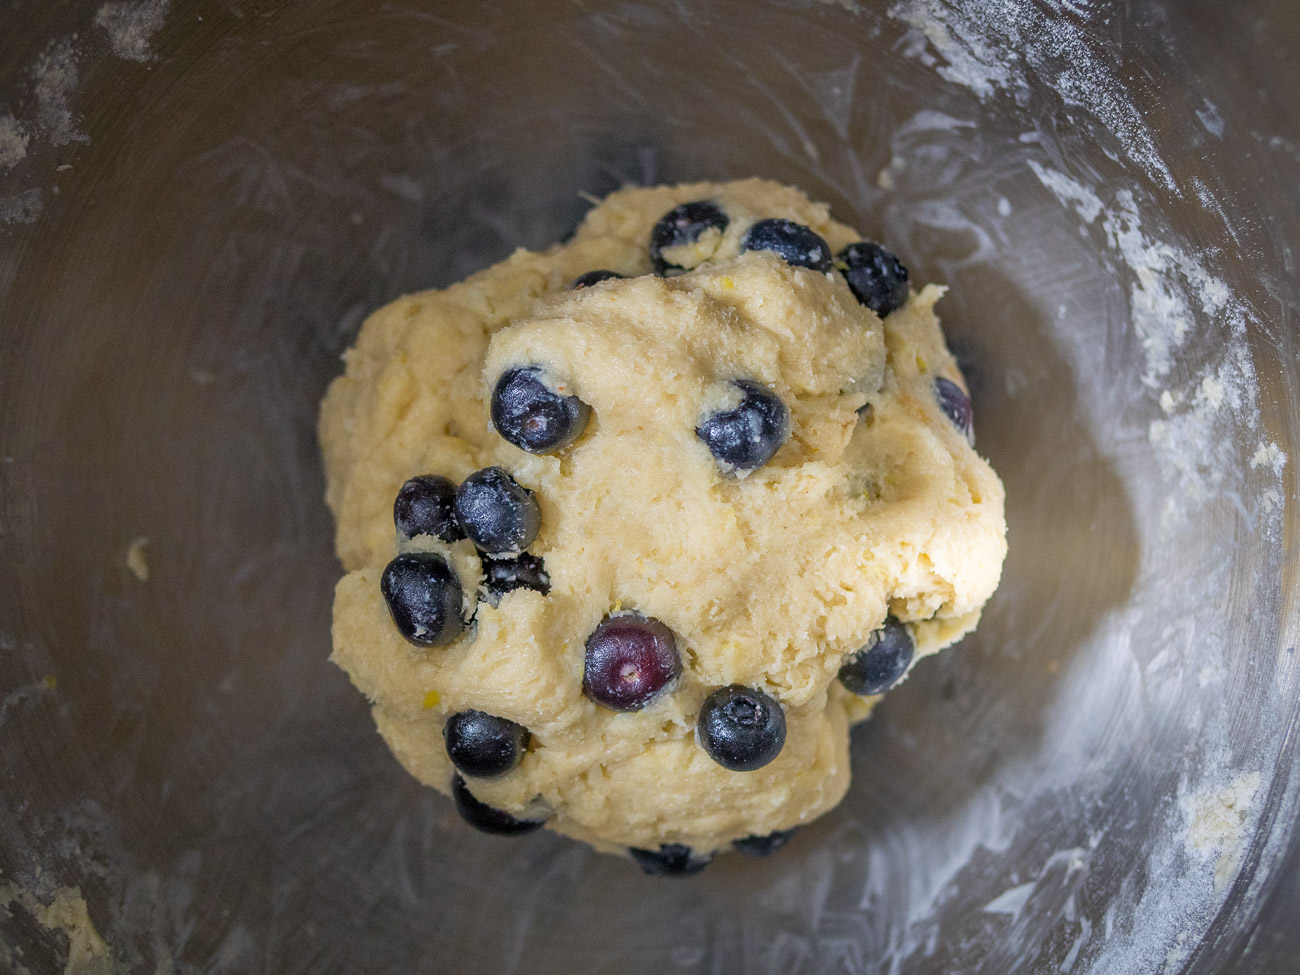 In a medium bowl whisk together cream, egg, and vanilla. Slowly add this mixture to the flour and butter blend. Dough will be thick. Gently fold in blueberries.